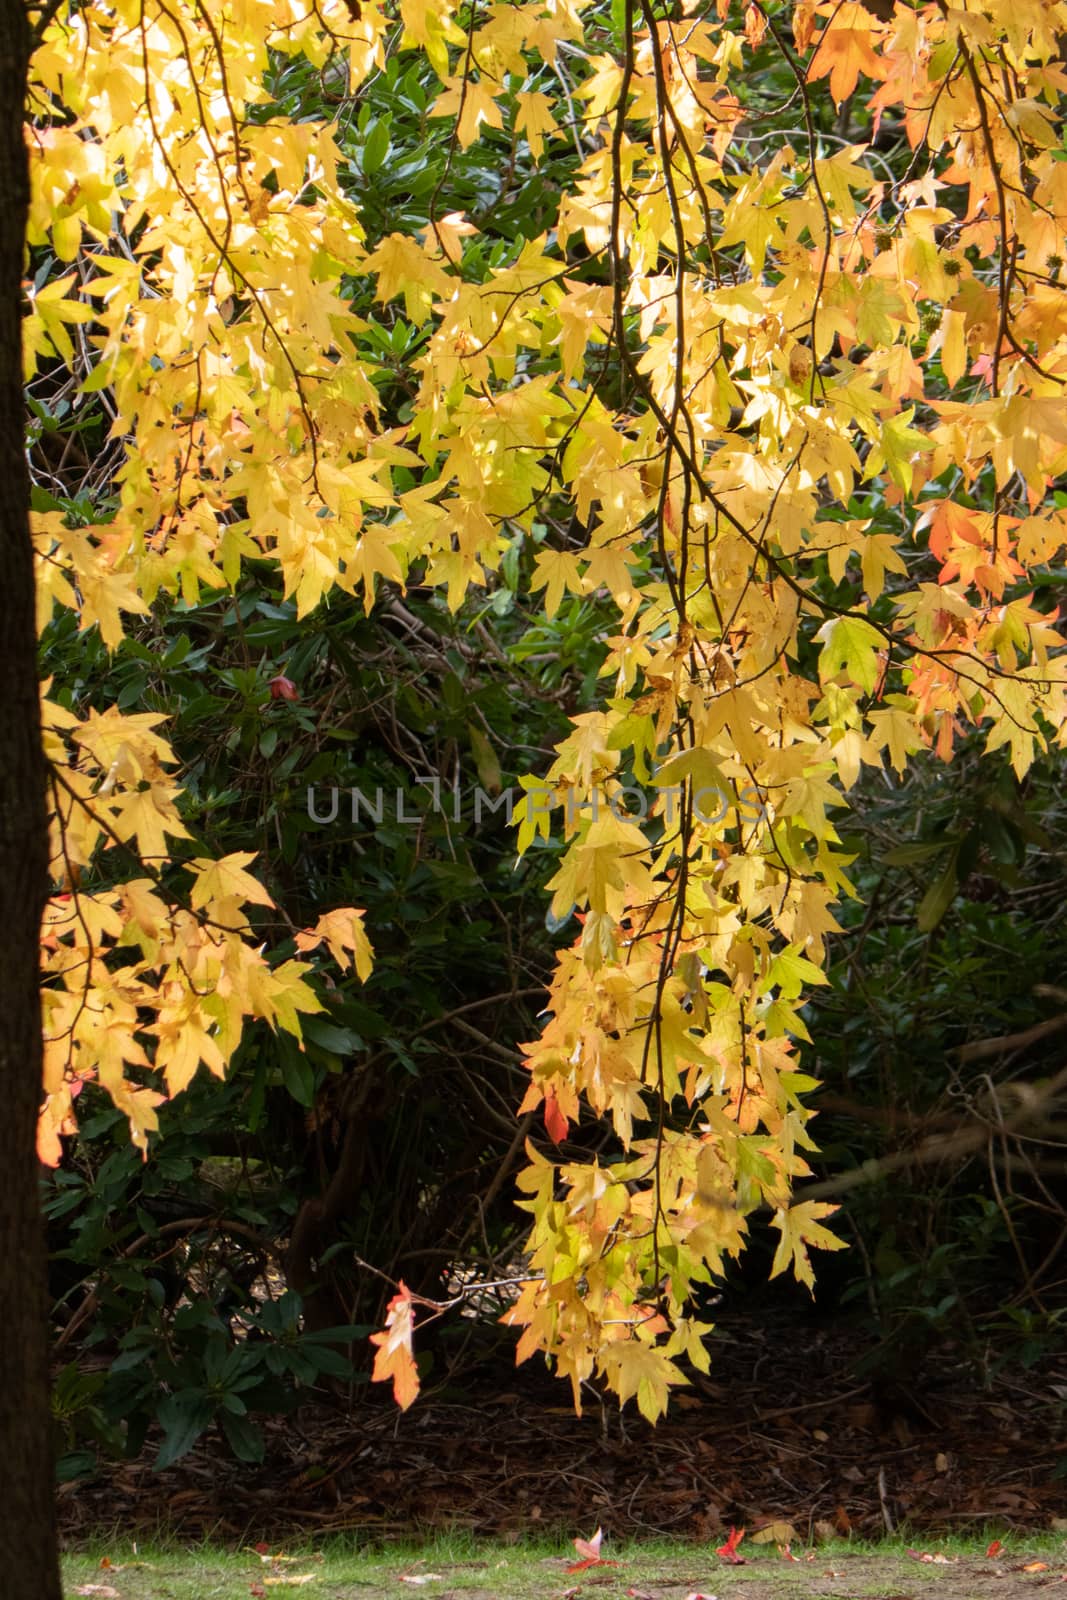 Autumn colours on trees in the fall, red, gold, yellow leaves beautiful sunlight by kgboxford